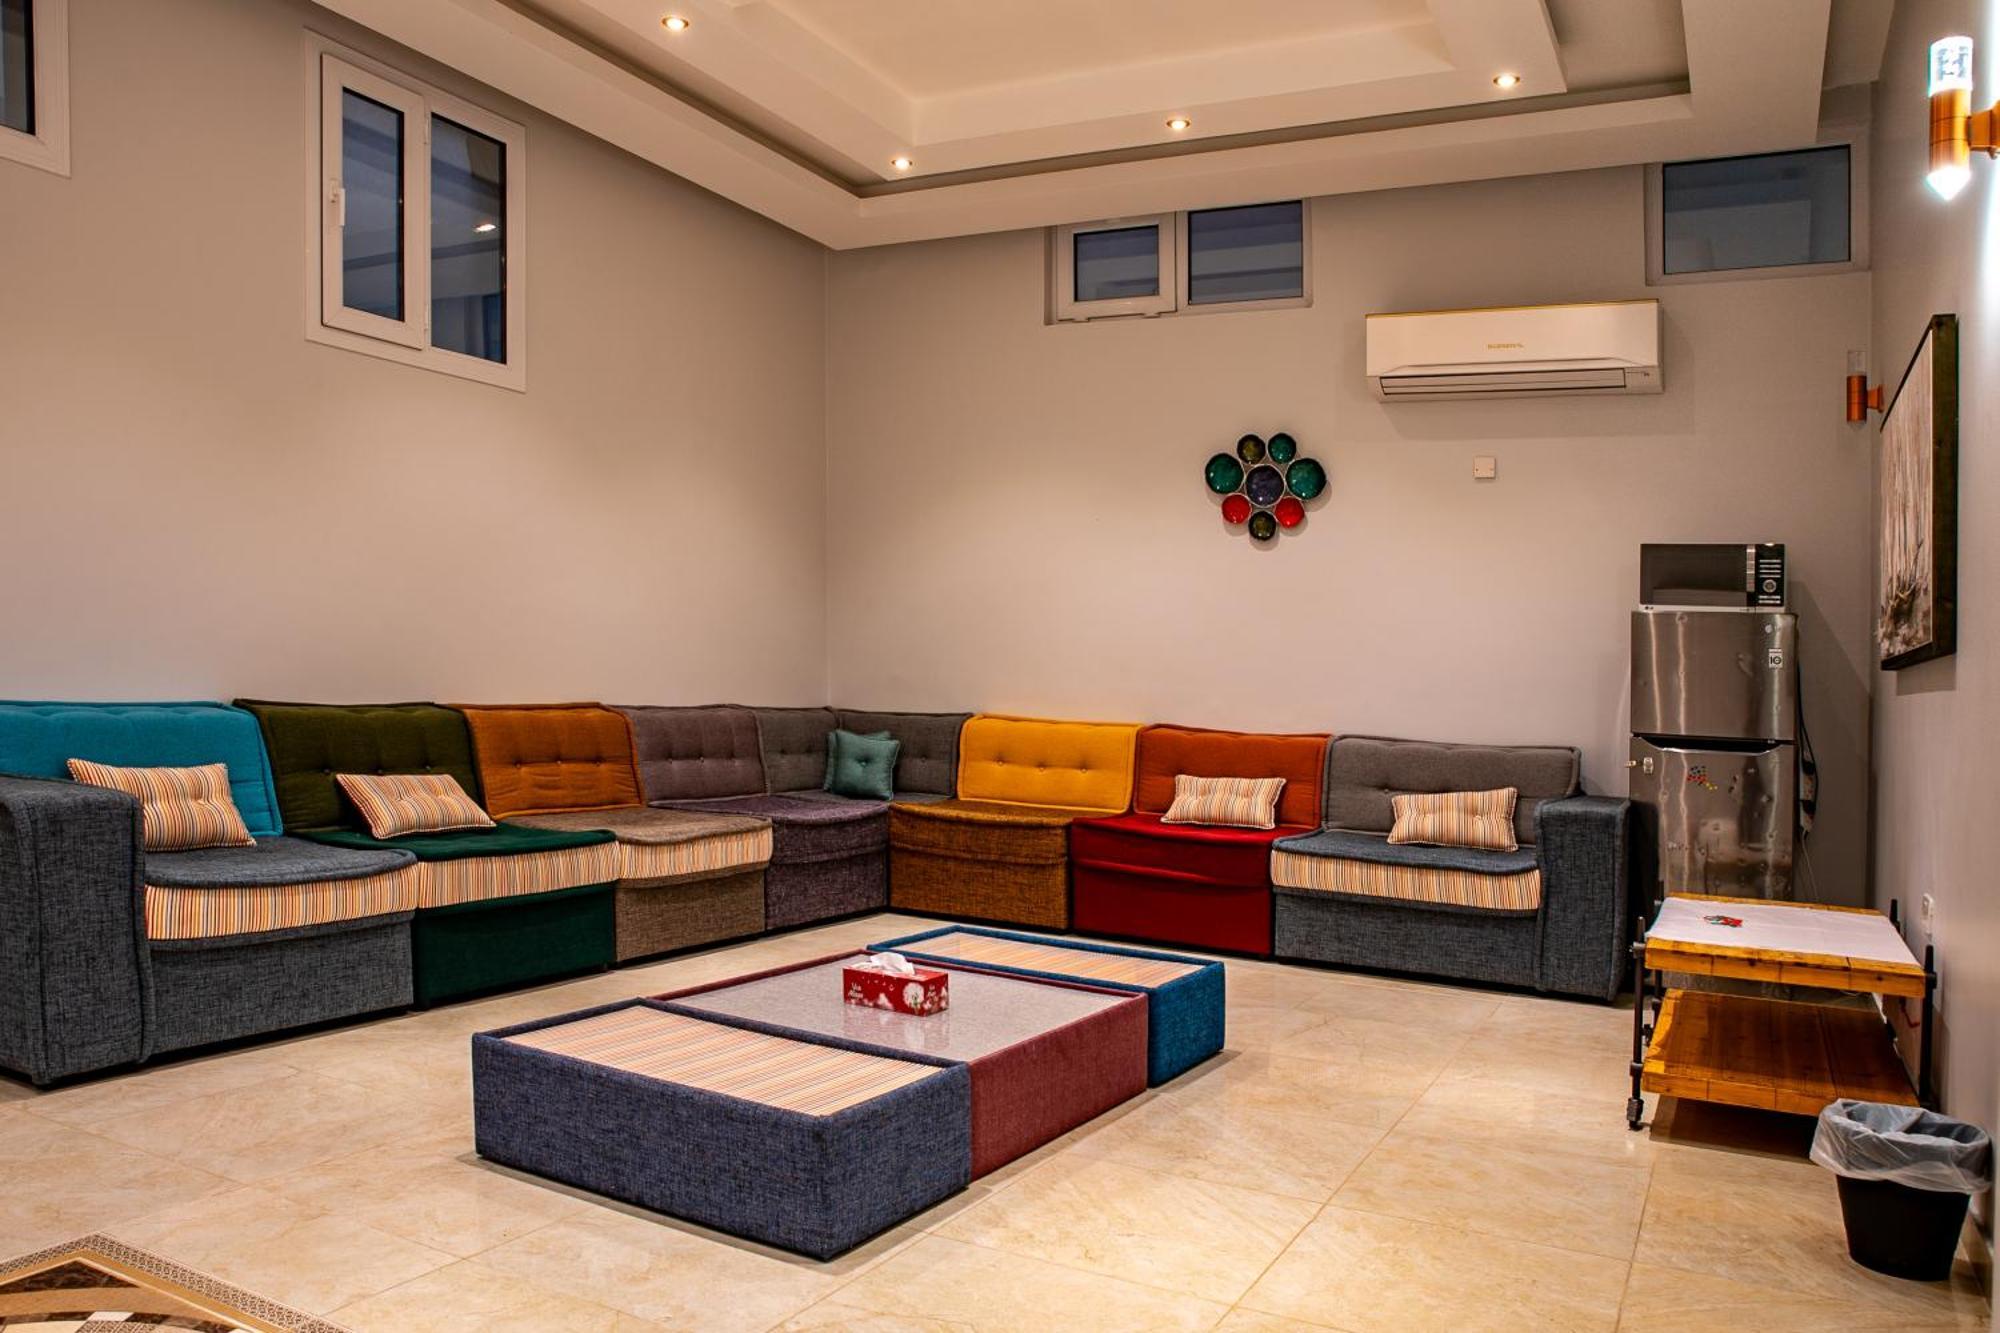 Elegant Garden Stay With 2 Living Areas, 2 Bedrooms, 1 Full And 1 Half Bath For 6 Guests Umm Al Amad Zewnętrze zdjęcie